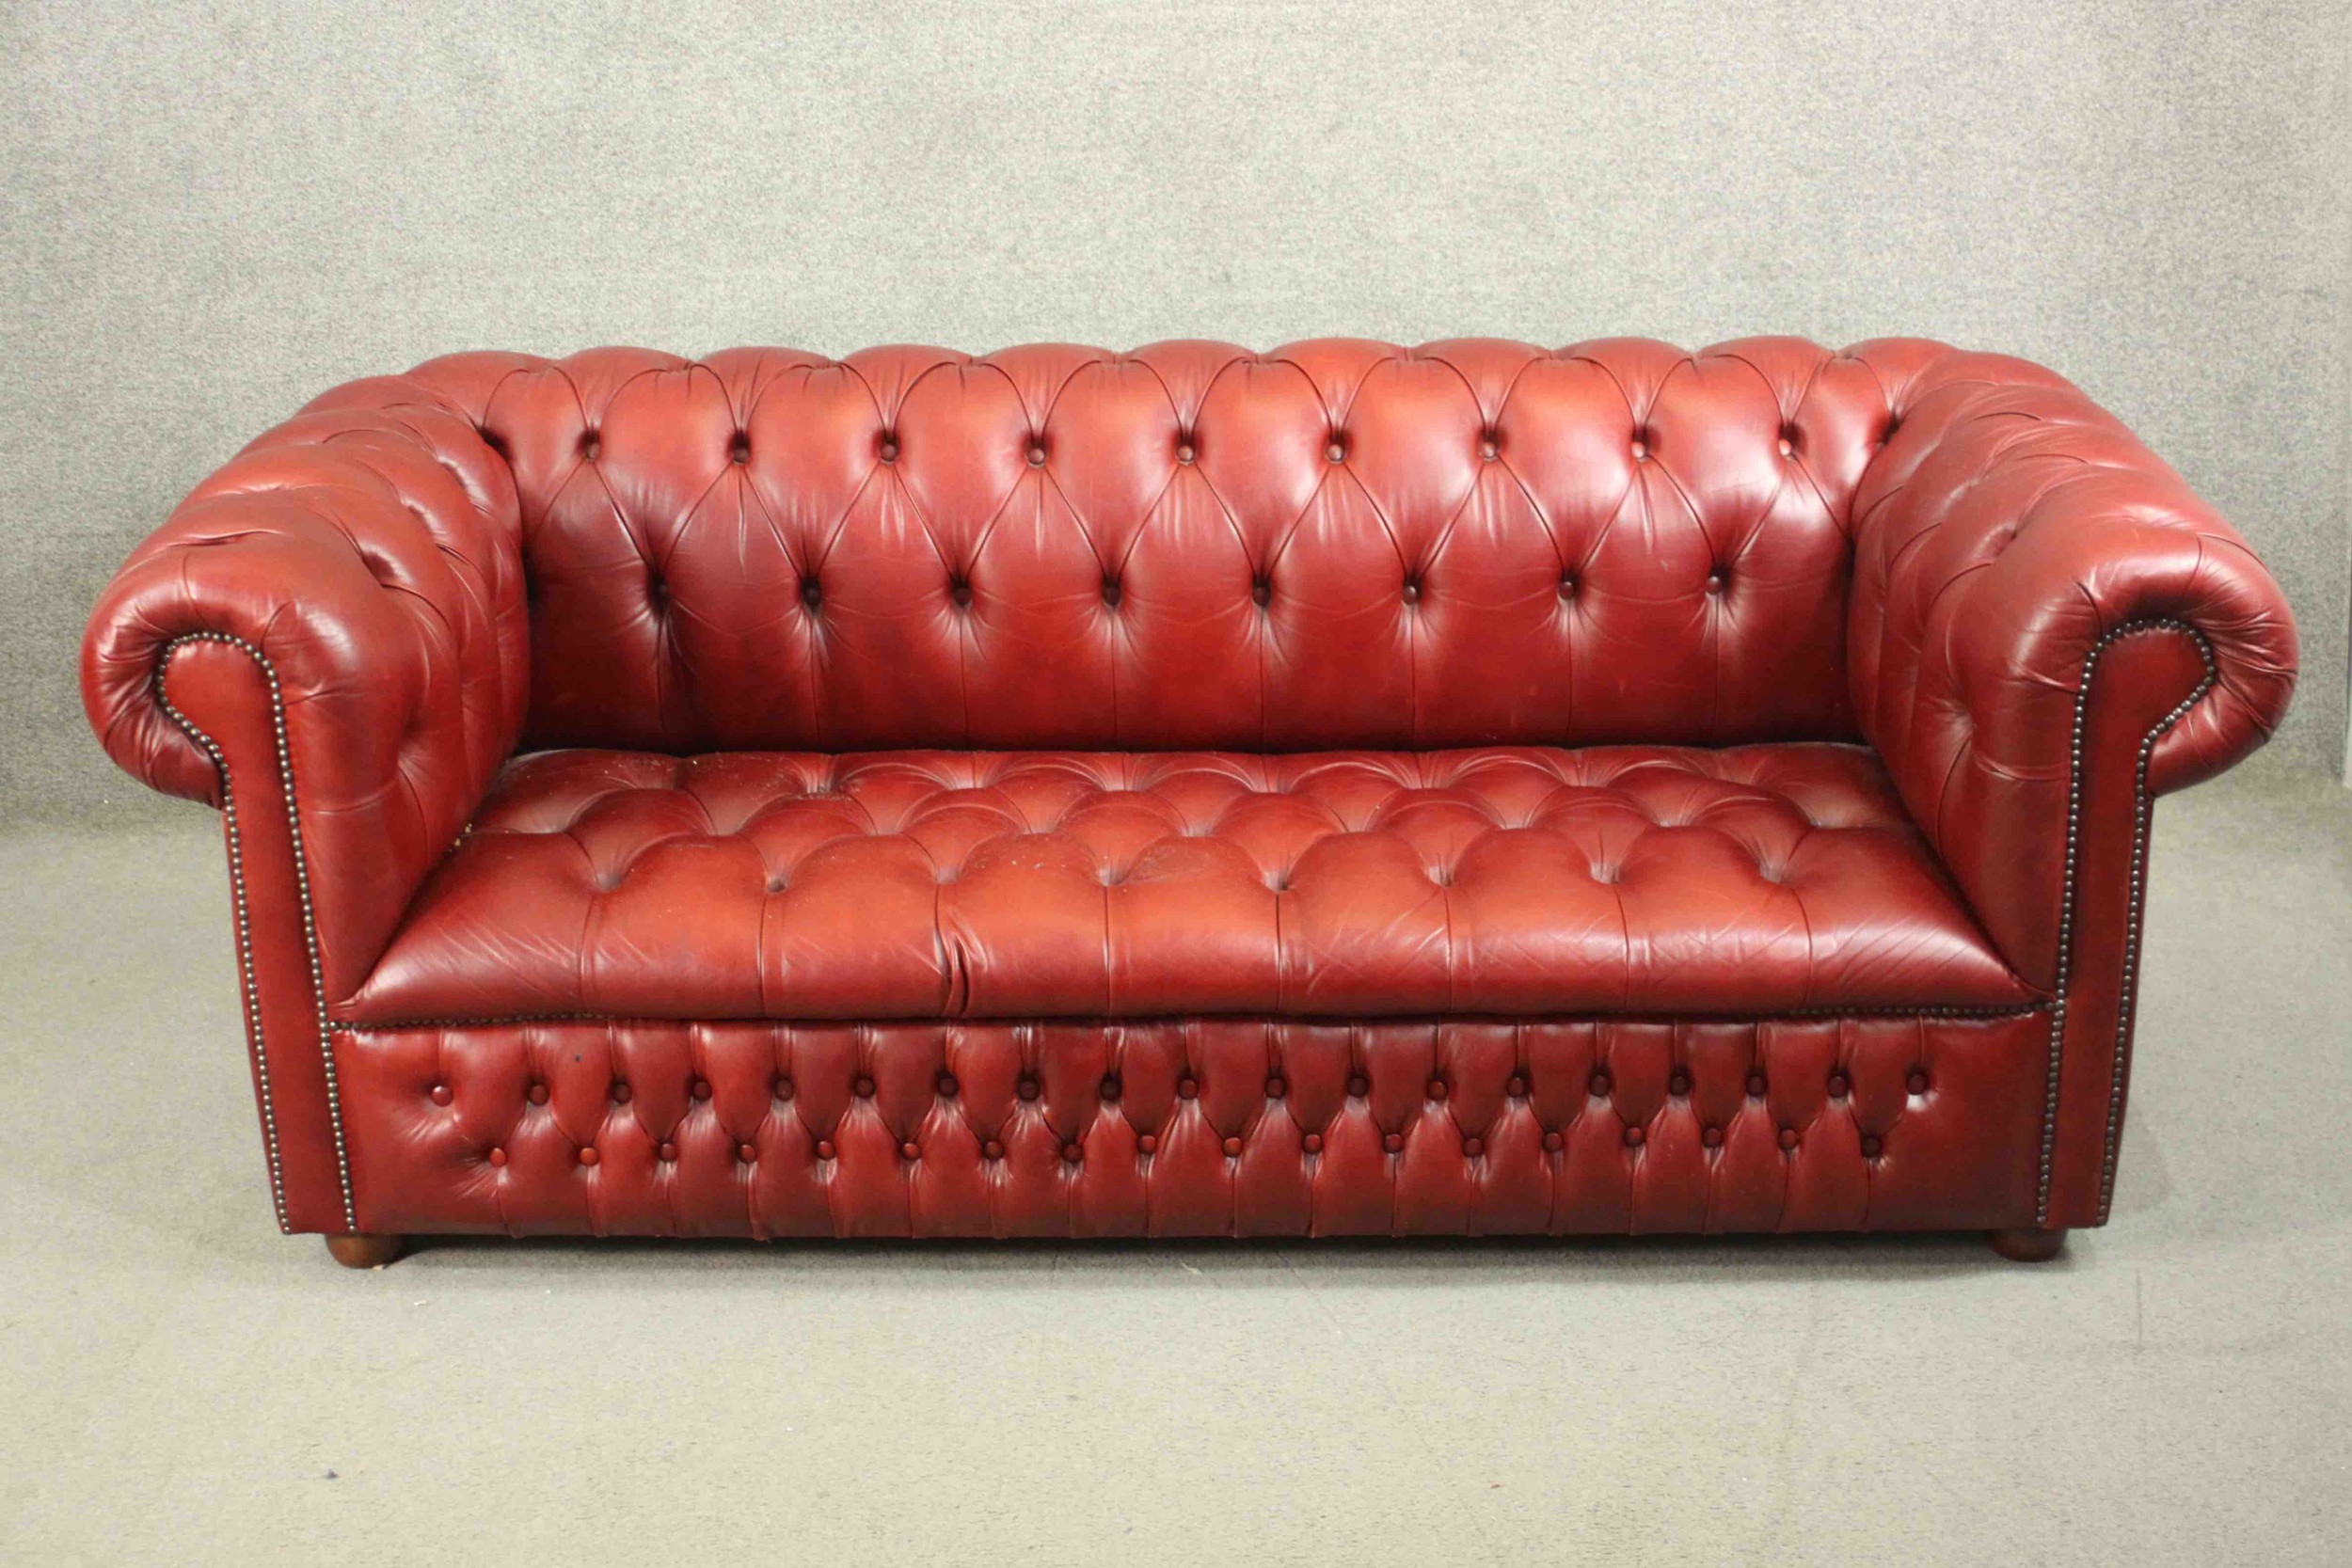 A red leather Chesterfield sofa, buttoned to the back, arms, seat, and front, on bun feet. H.75 W.